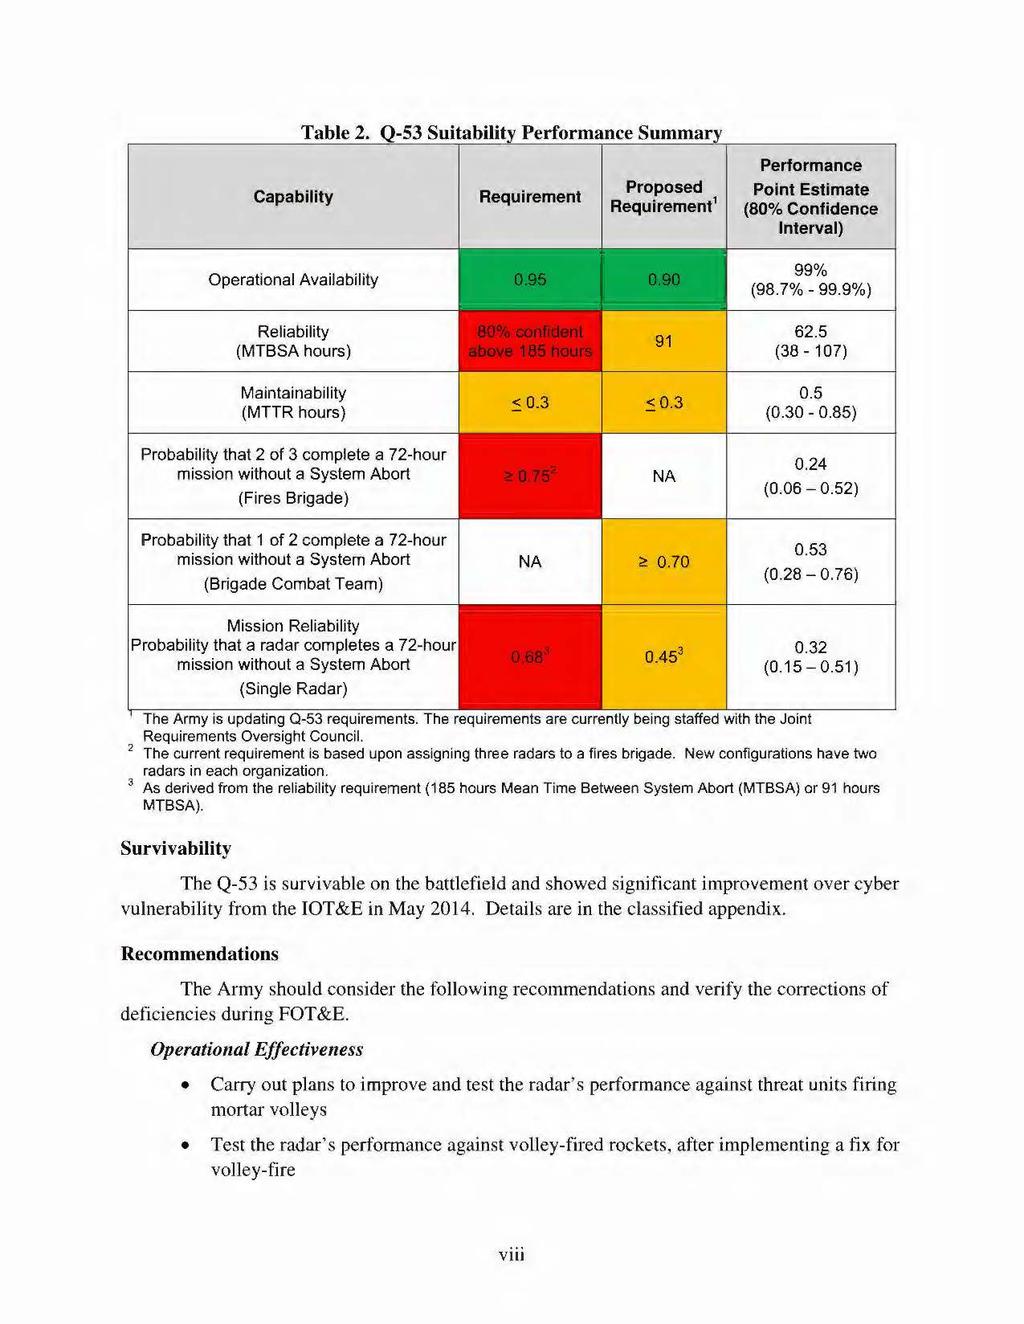 Table 2. Q-53 Suitability Performance Summary Capability Requirement Proposed Requirement 1 Performance Point Estimate (8% Confidence Interval) Operational Availability 99% (98.7% - 99.